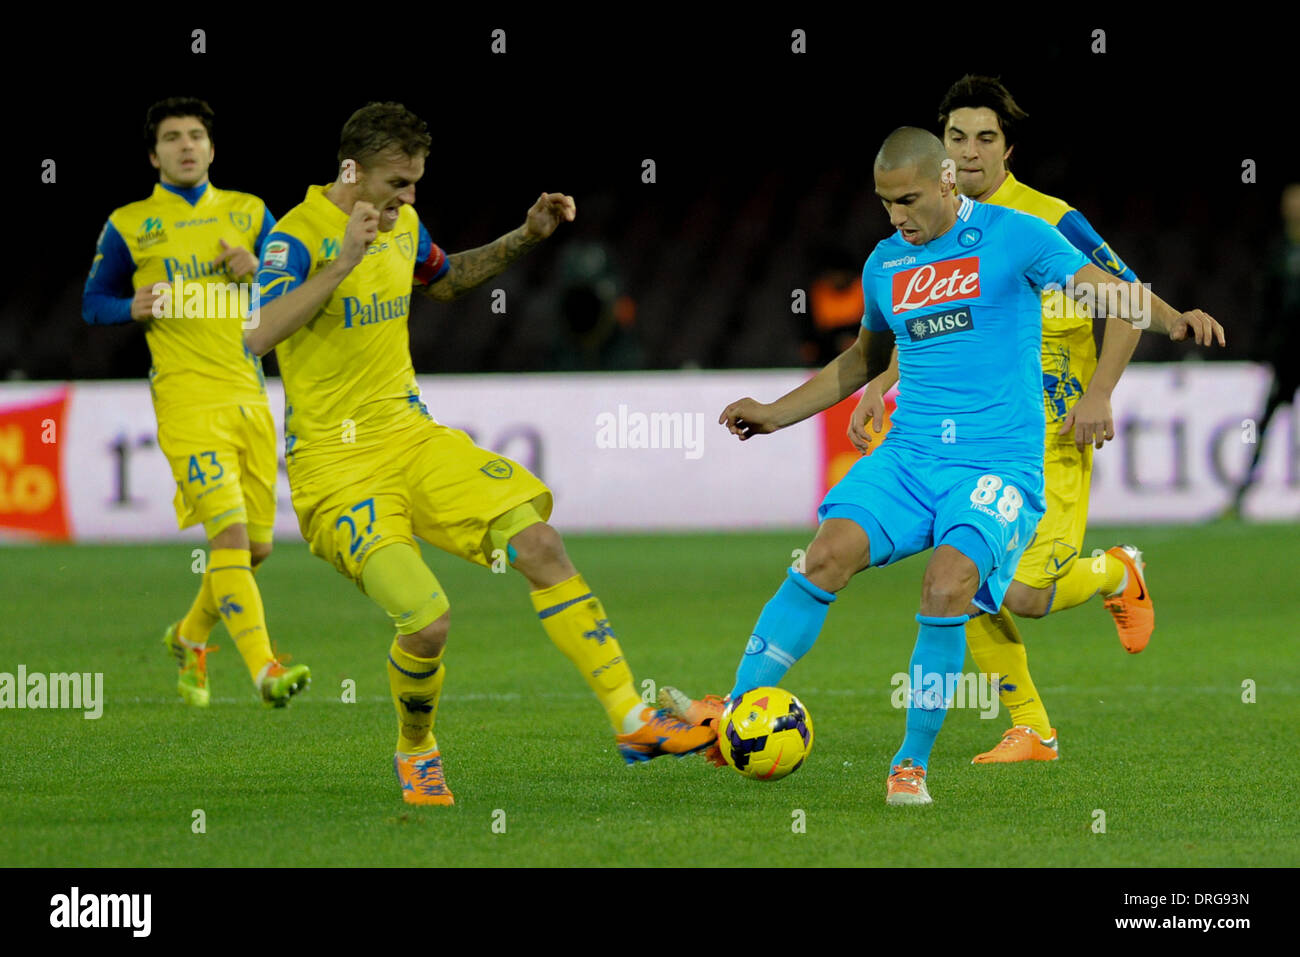 Naples, Italy. 25th Jan, 2014. Gokhan Inler of SSC Napoli Rigoni Luca in action during Football / Soccer : Italian Serie A match between SSC Napoli and AC Chievo Verona at Stadio San Paolo in Naples, Italy, on January 25, 2014. Credit:  Franco Romano/NurPhoto/ZUMAPRESS.com/Alamy Live News Stock Photo